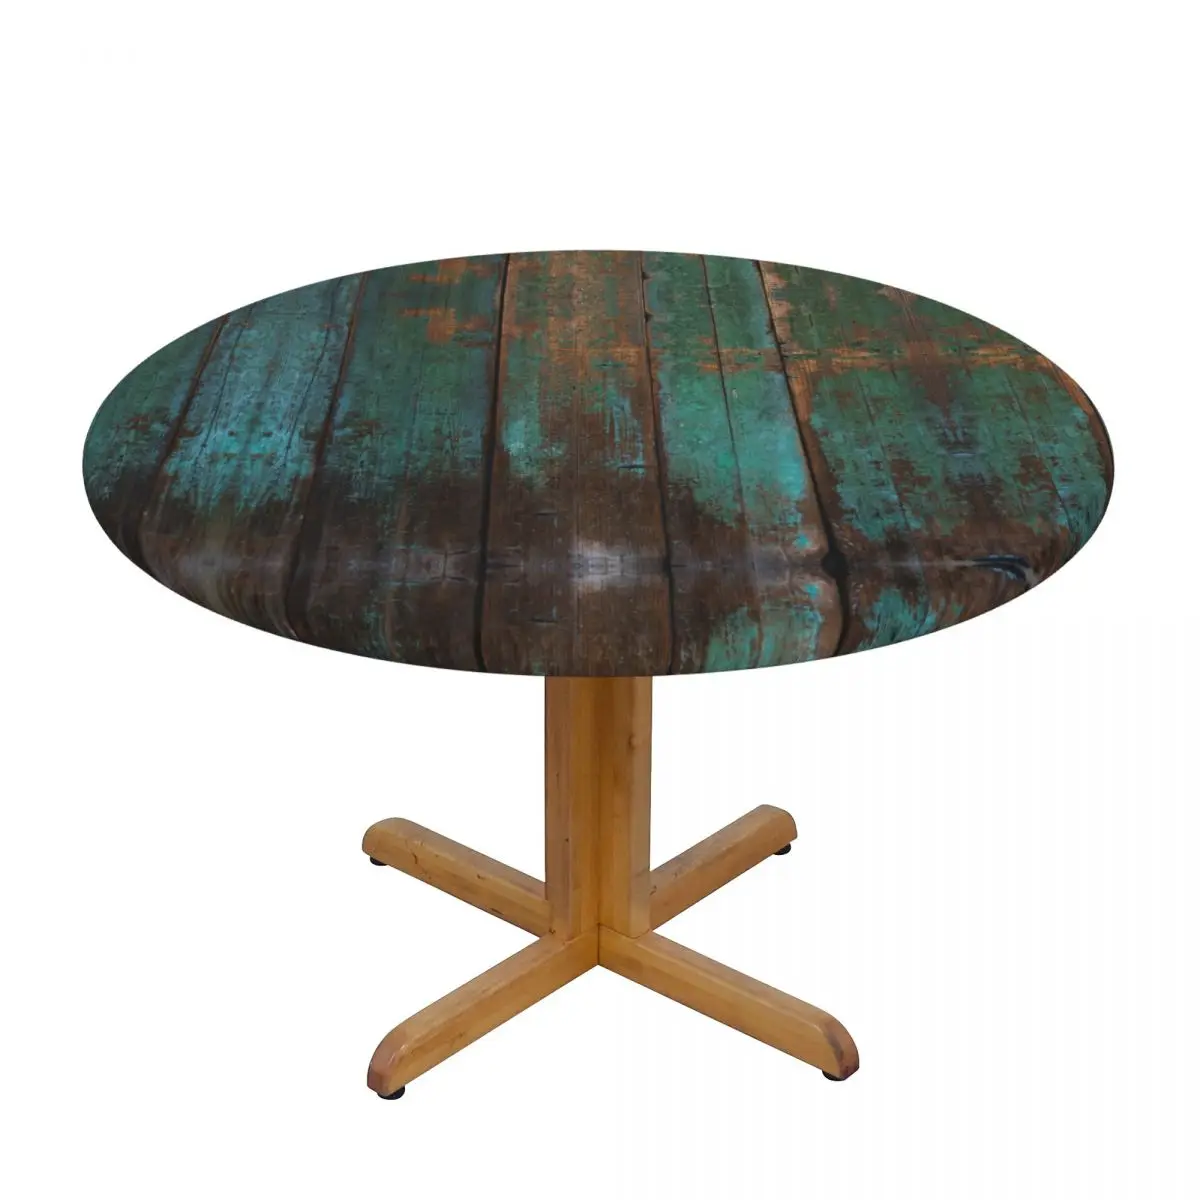 

Round Table Cover Cloth Protector Polyester Tablecloth Rustic Distressed Teal Green Barn Wood Table Cover with Elastic Edged